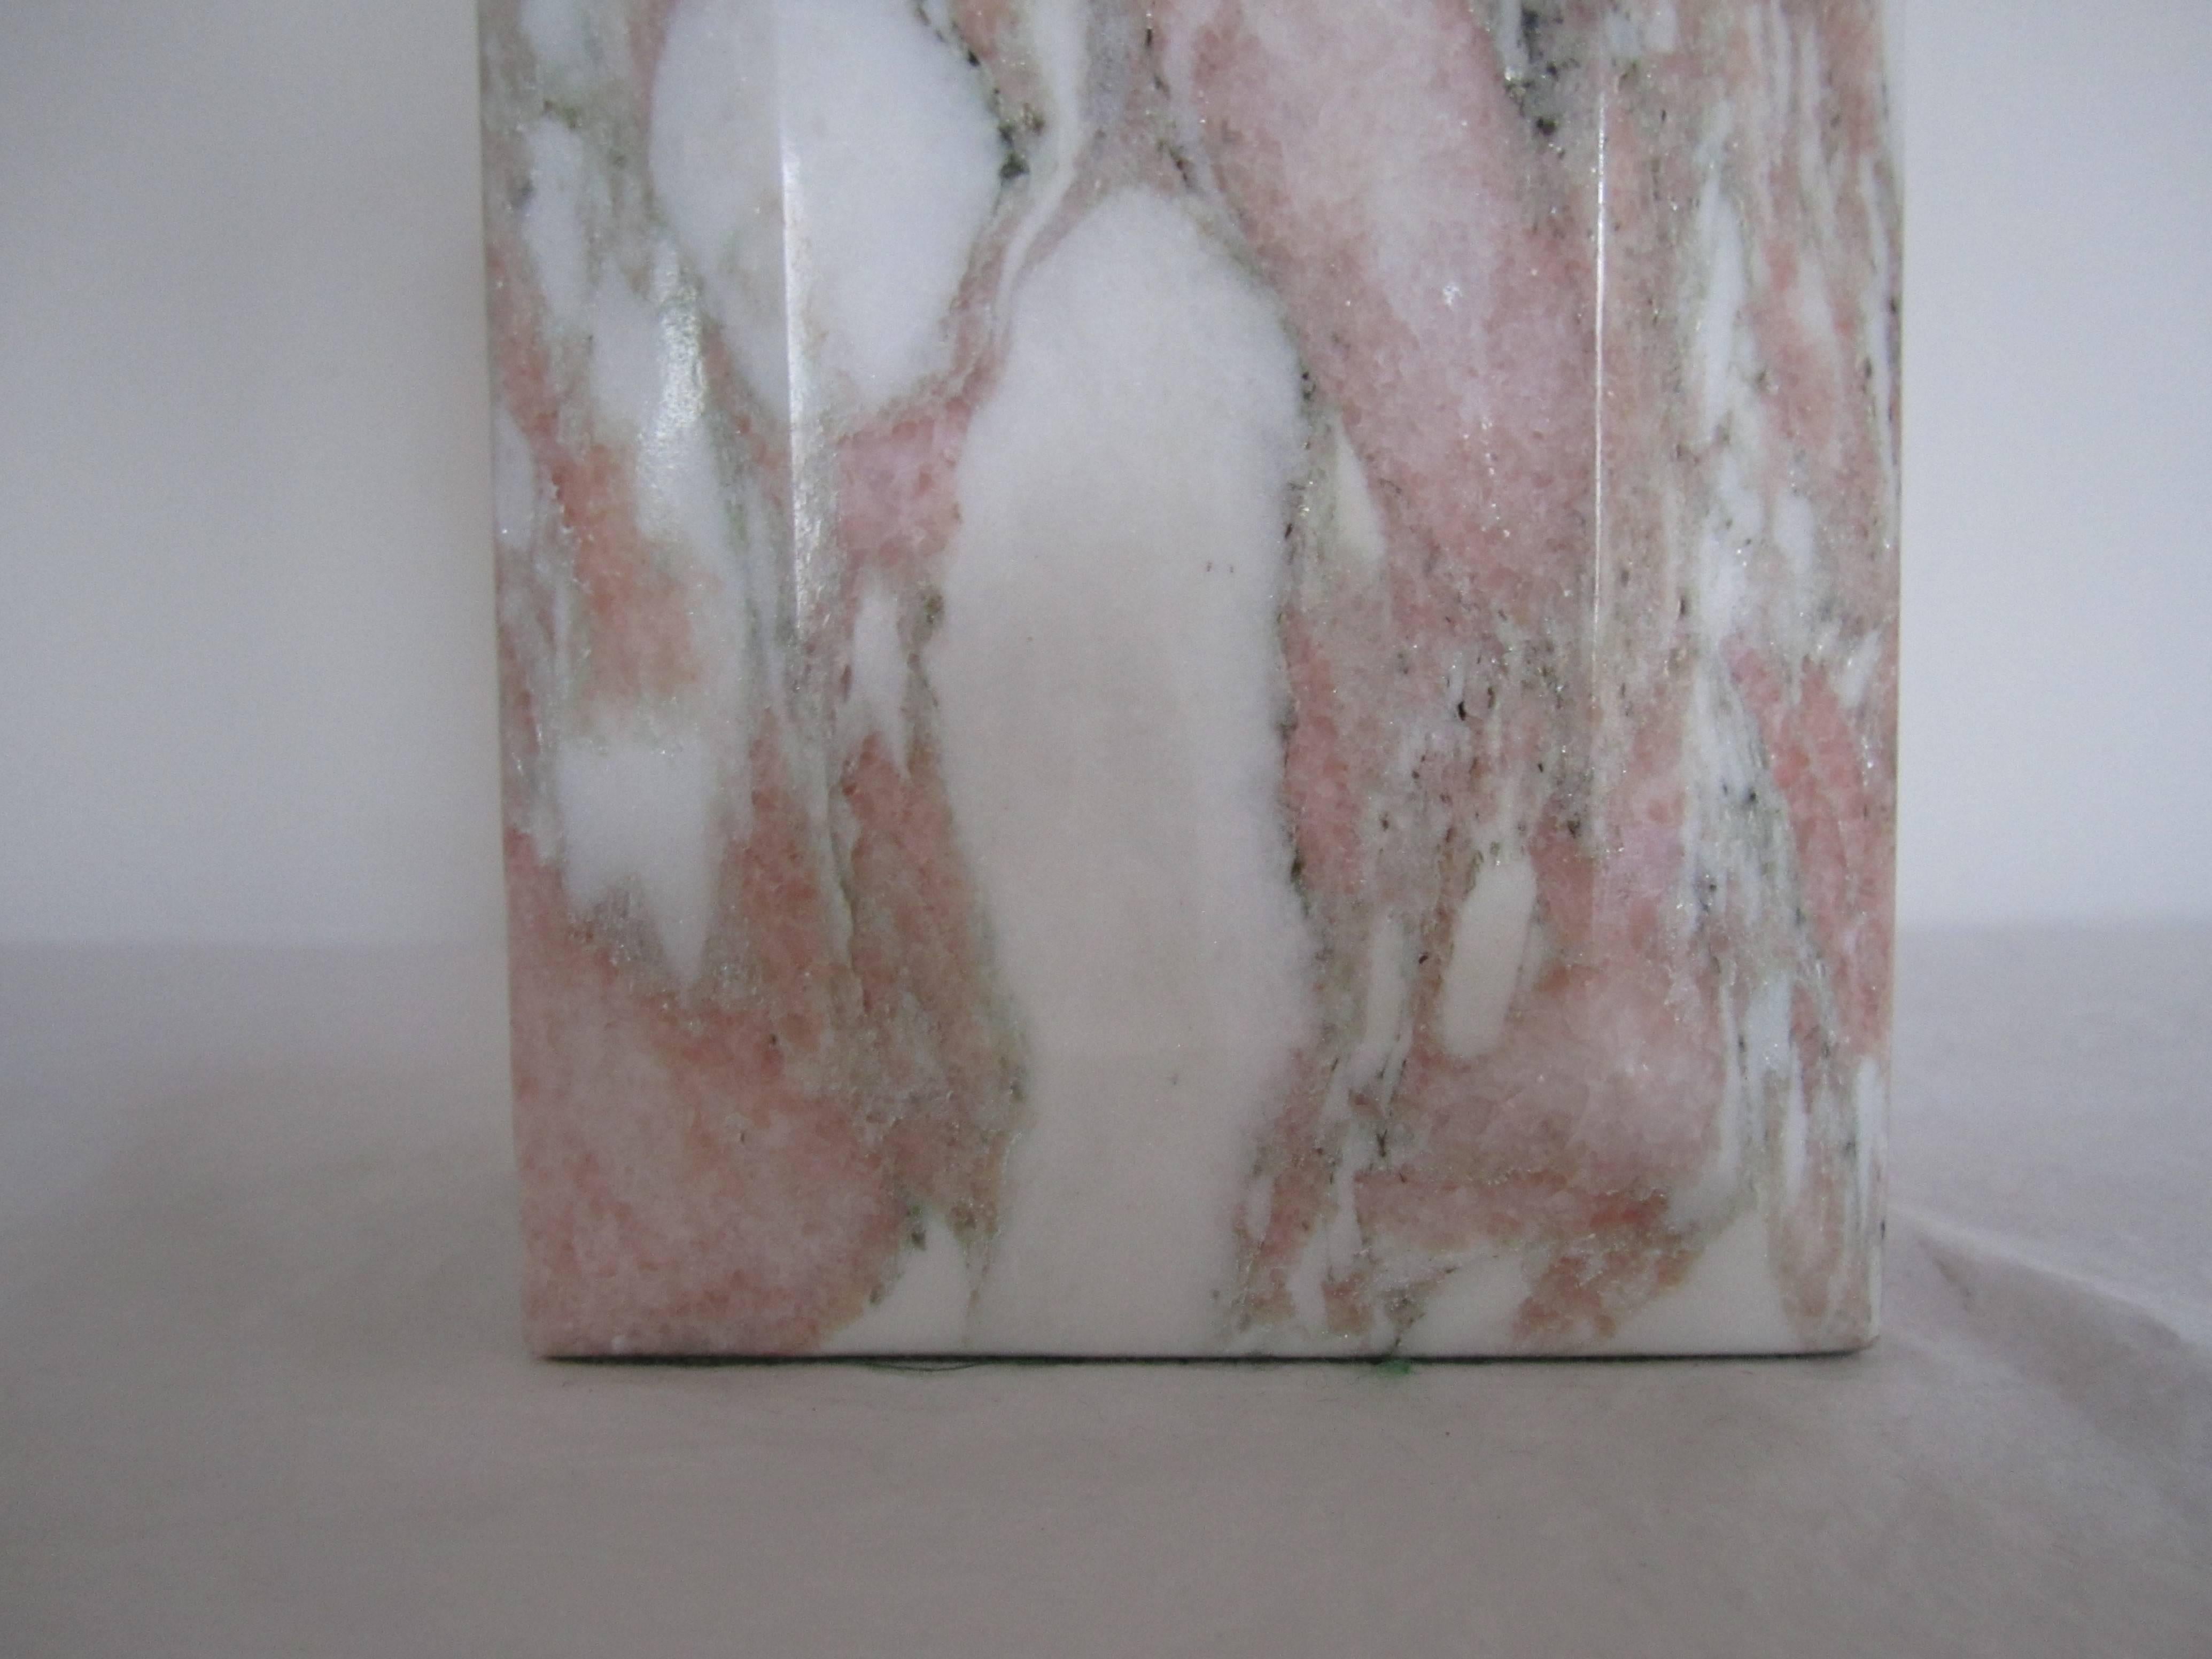 Marble Desk or Table Lamp in Pink and White, circa 1970s For Sale 1